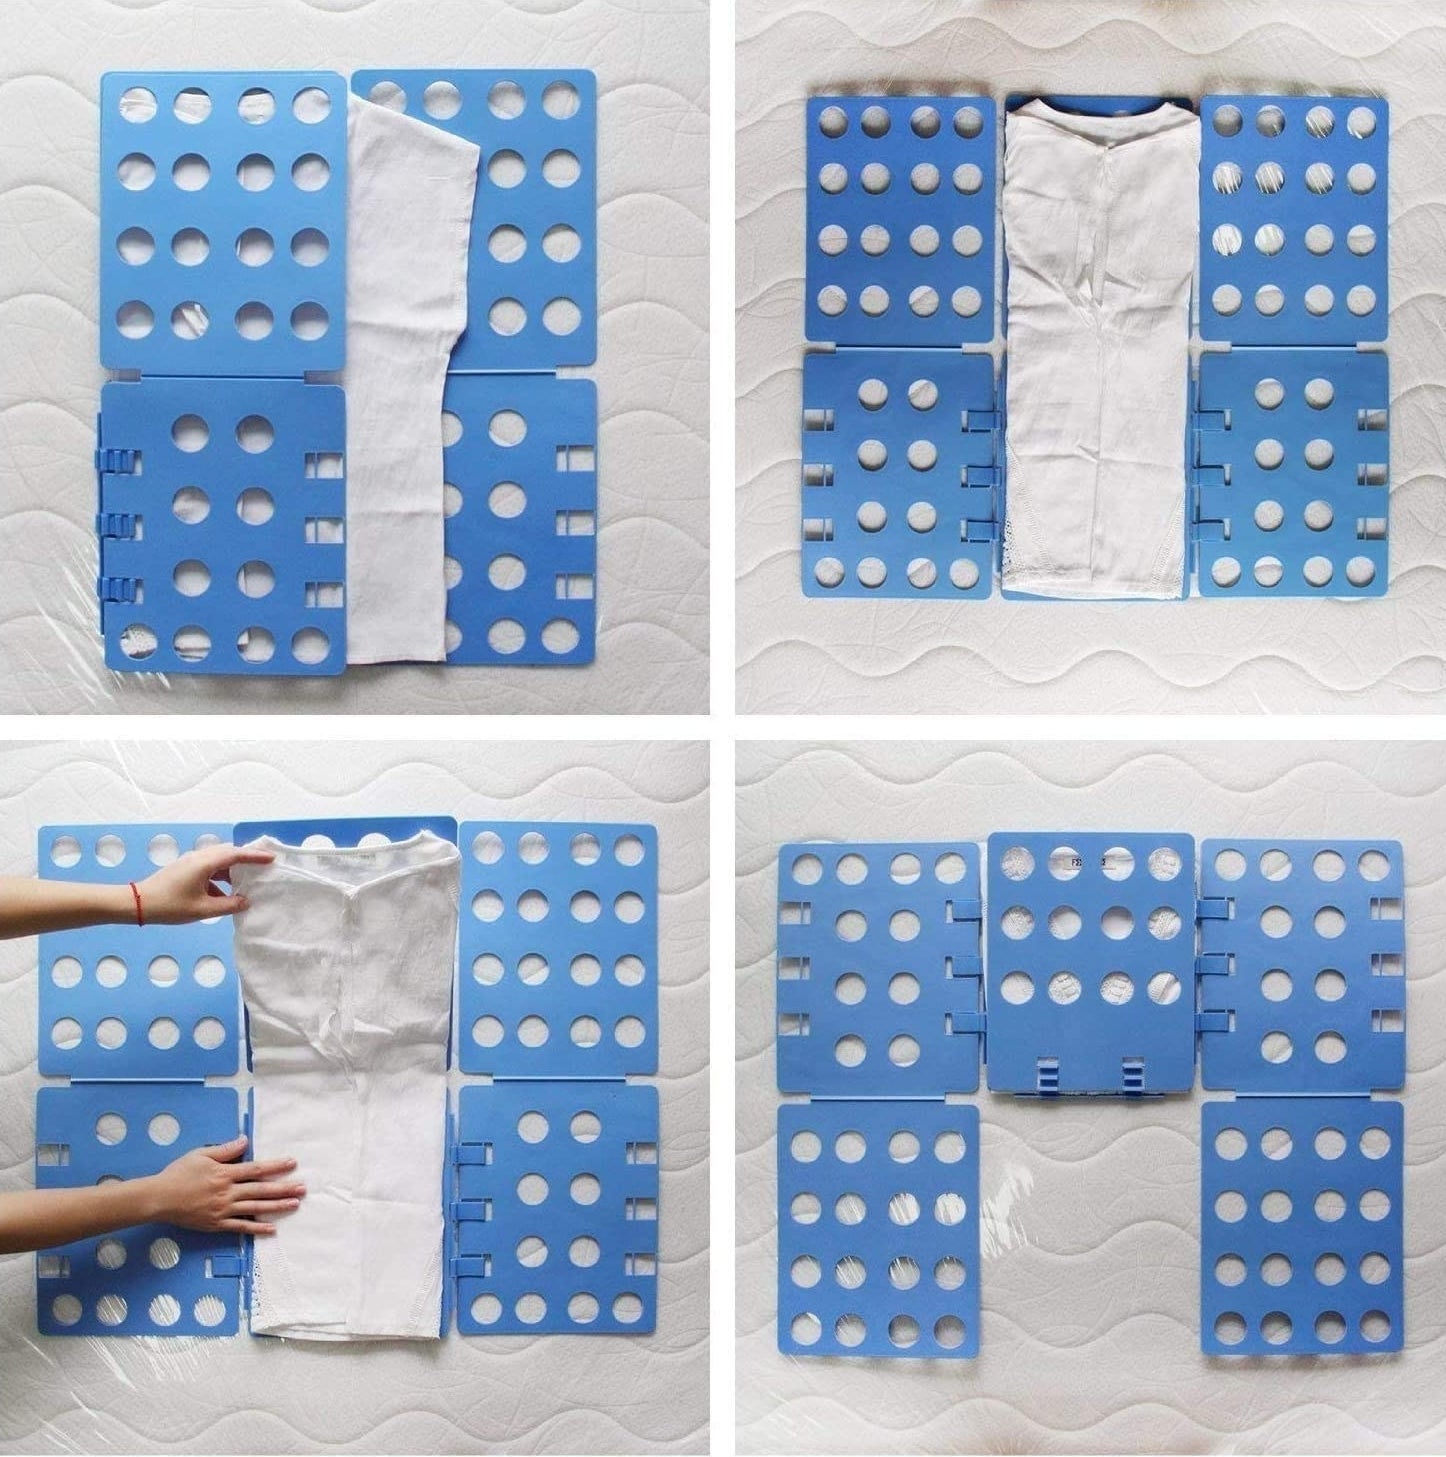 A person using the mat to fold a T-shirt